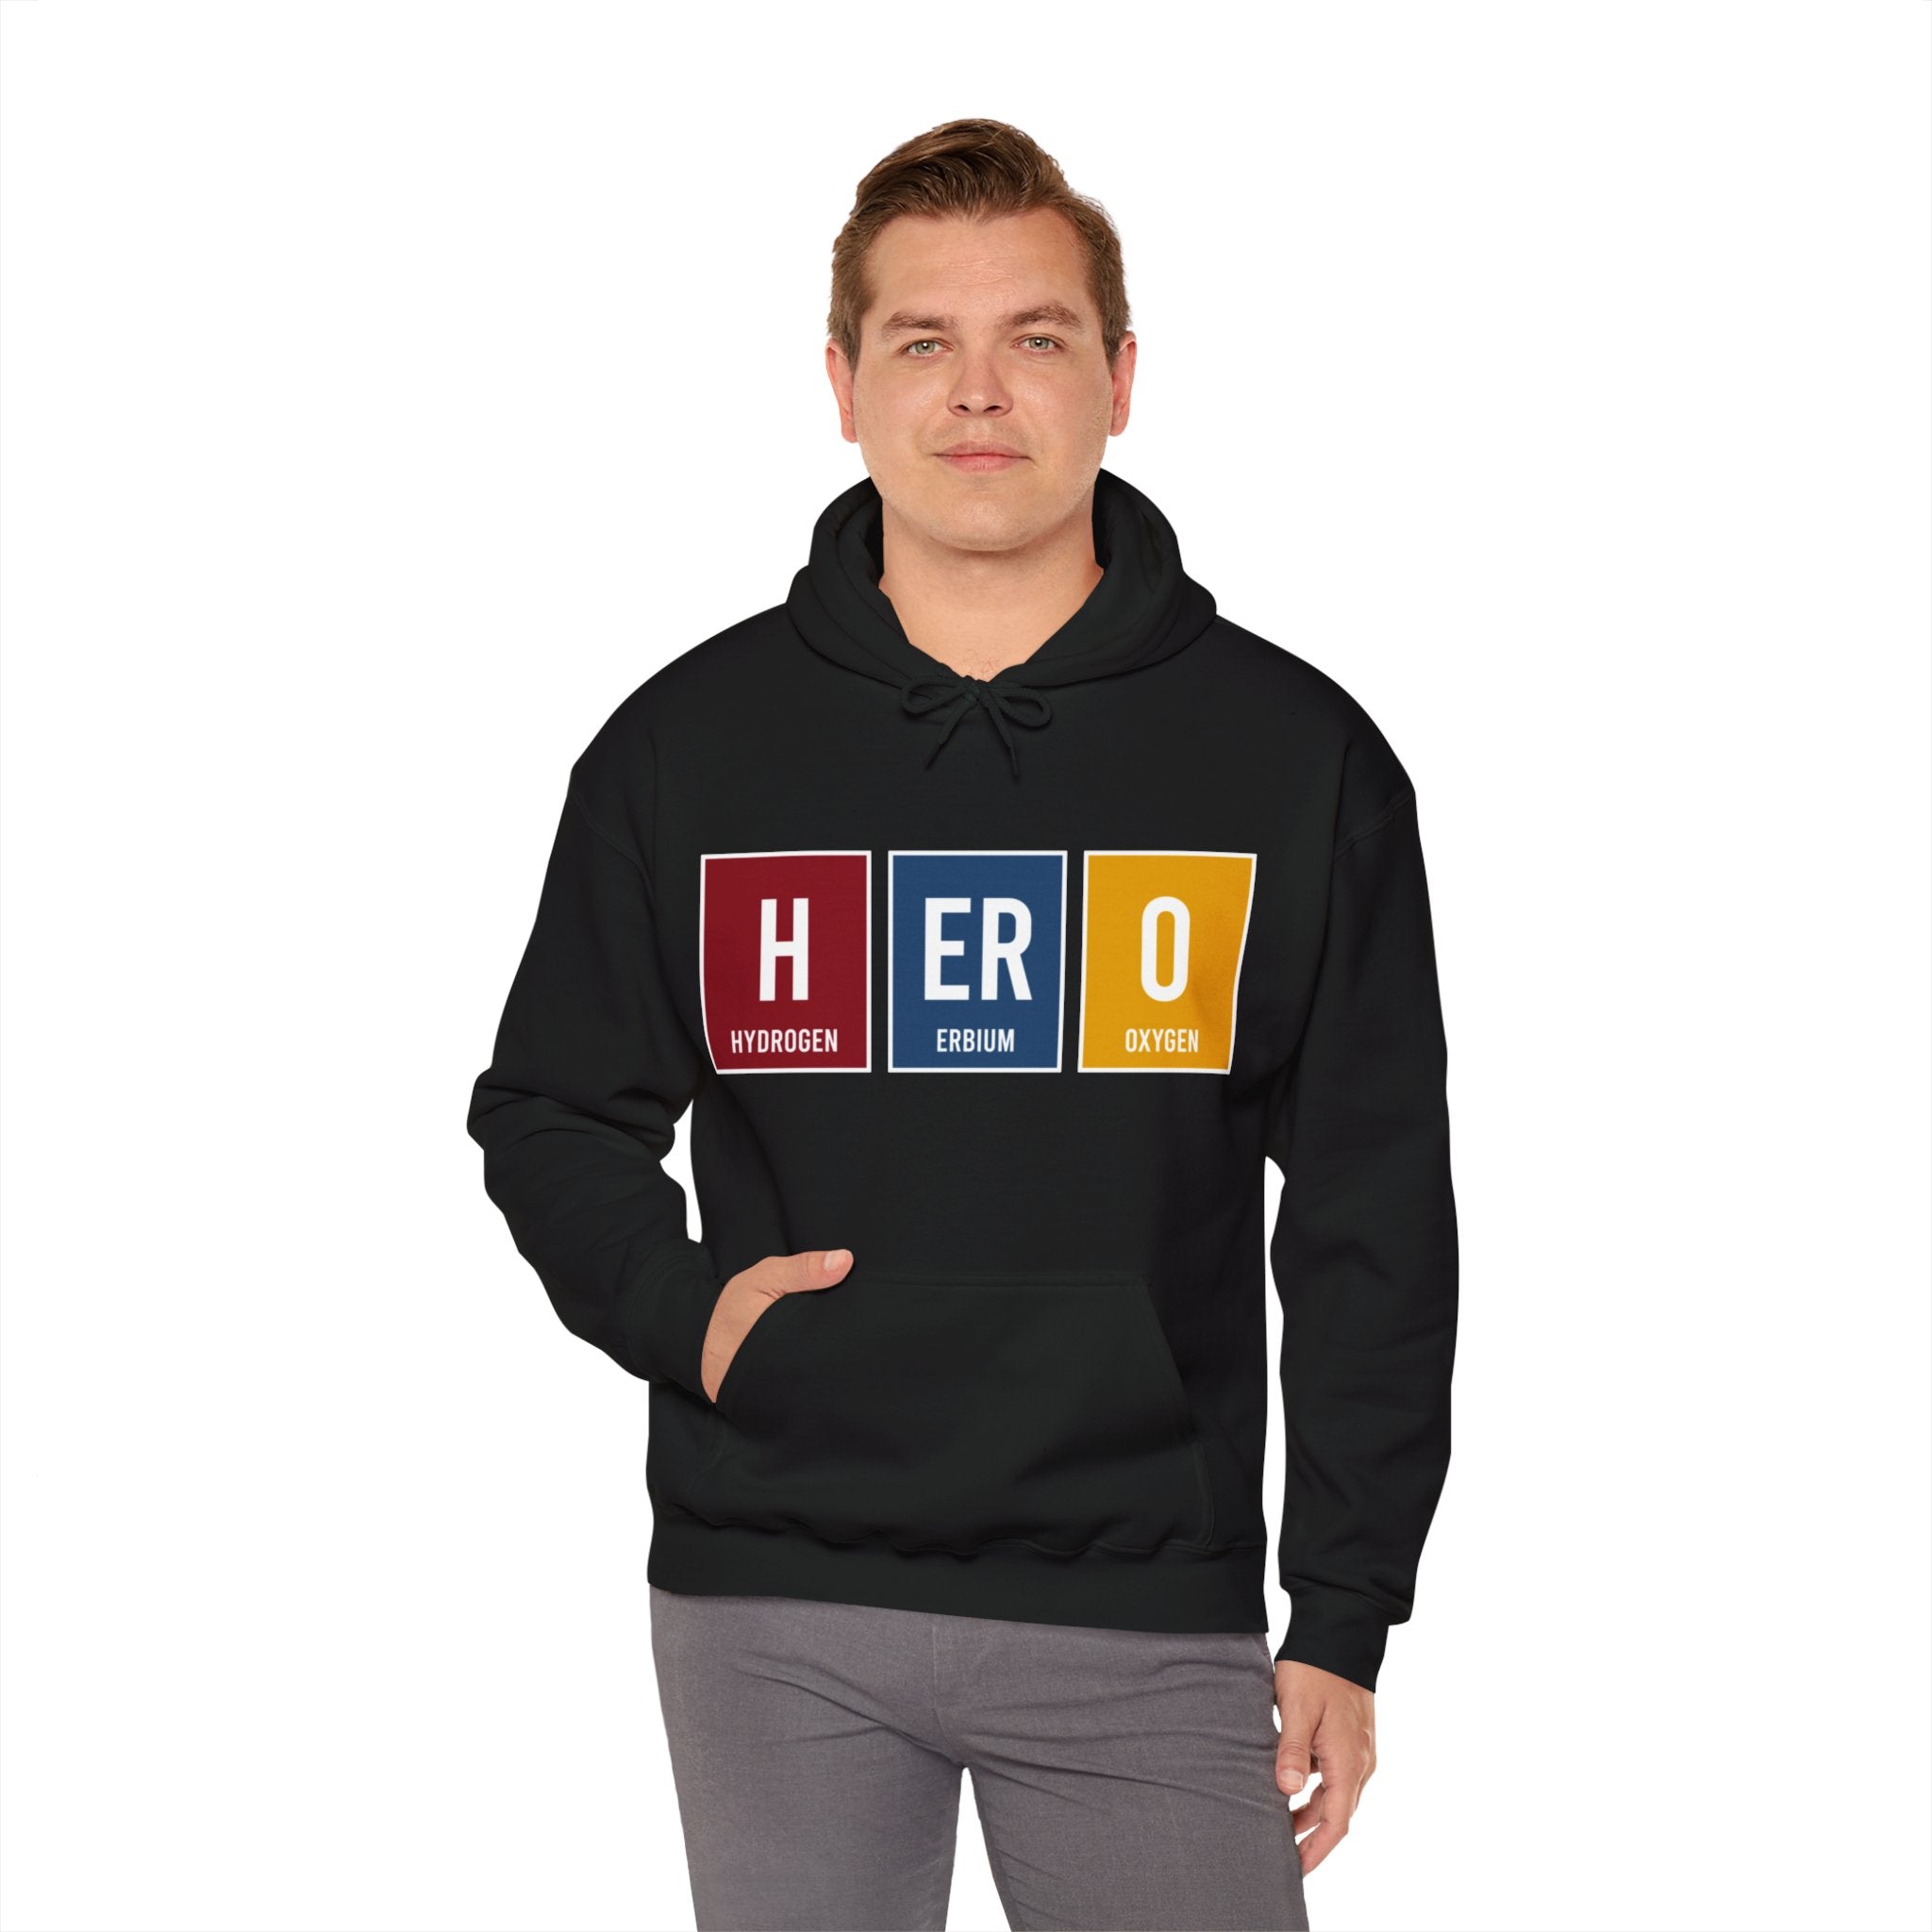 A person in a HERO - Hooded Sweatshirt stands with hands in the front pocket. The hoodie displays the text "HERO" using periodic table elements: Hydrogen, Erbium, and Oxygen, showcasing HERO designs that epitomize heroism.